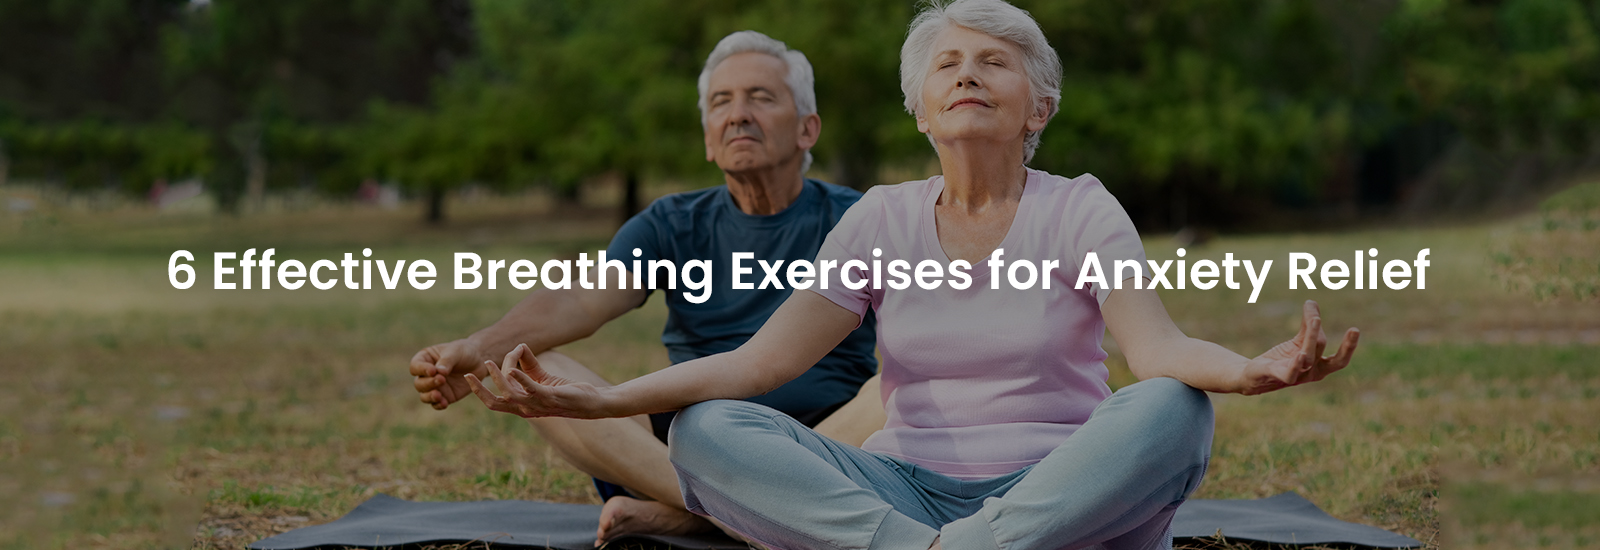 6 Effective Breathing Exercises for Anxiety Relief | Banner Image